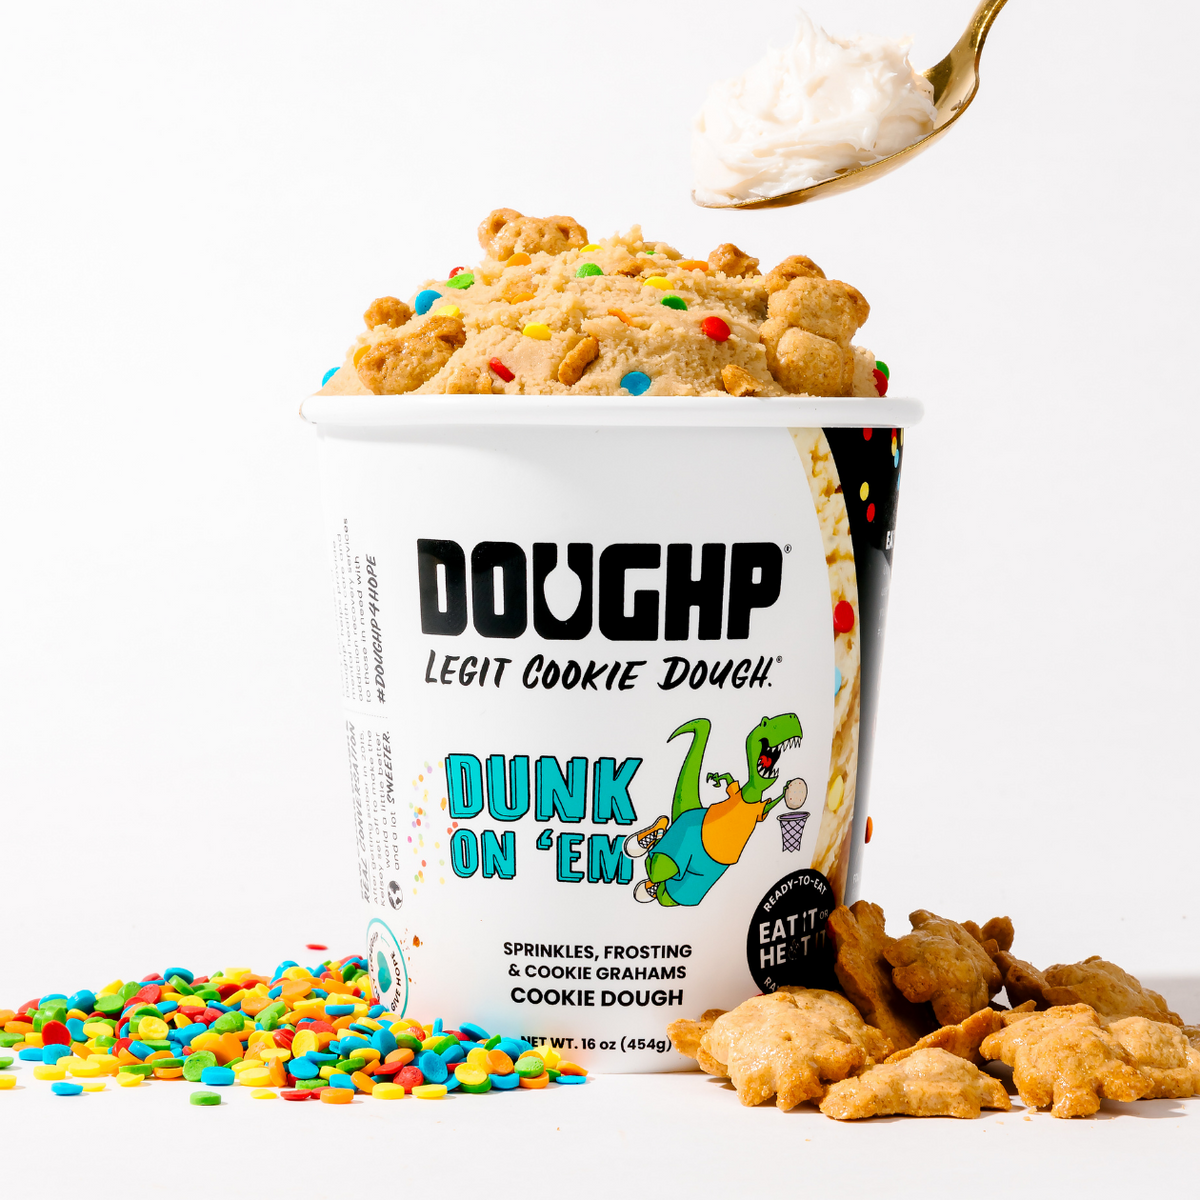 Bestseller Pack | Edible Cookie Dough Delivered | Doughp 4-Cup Pack | Makes 60 Cookies!